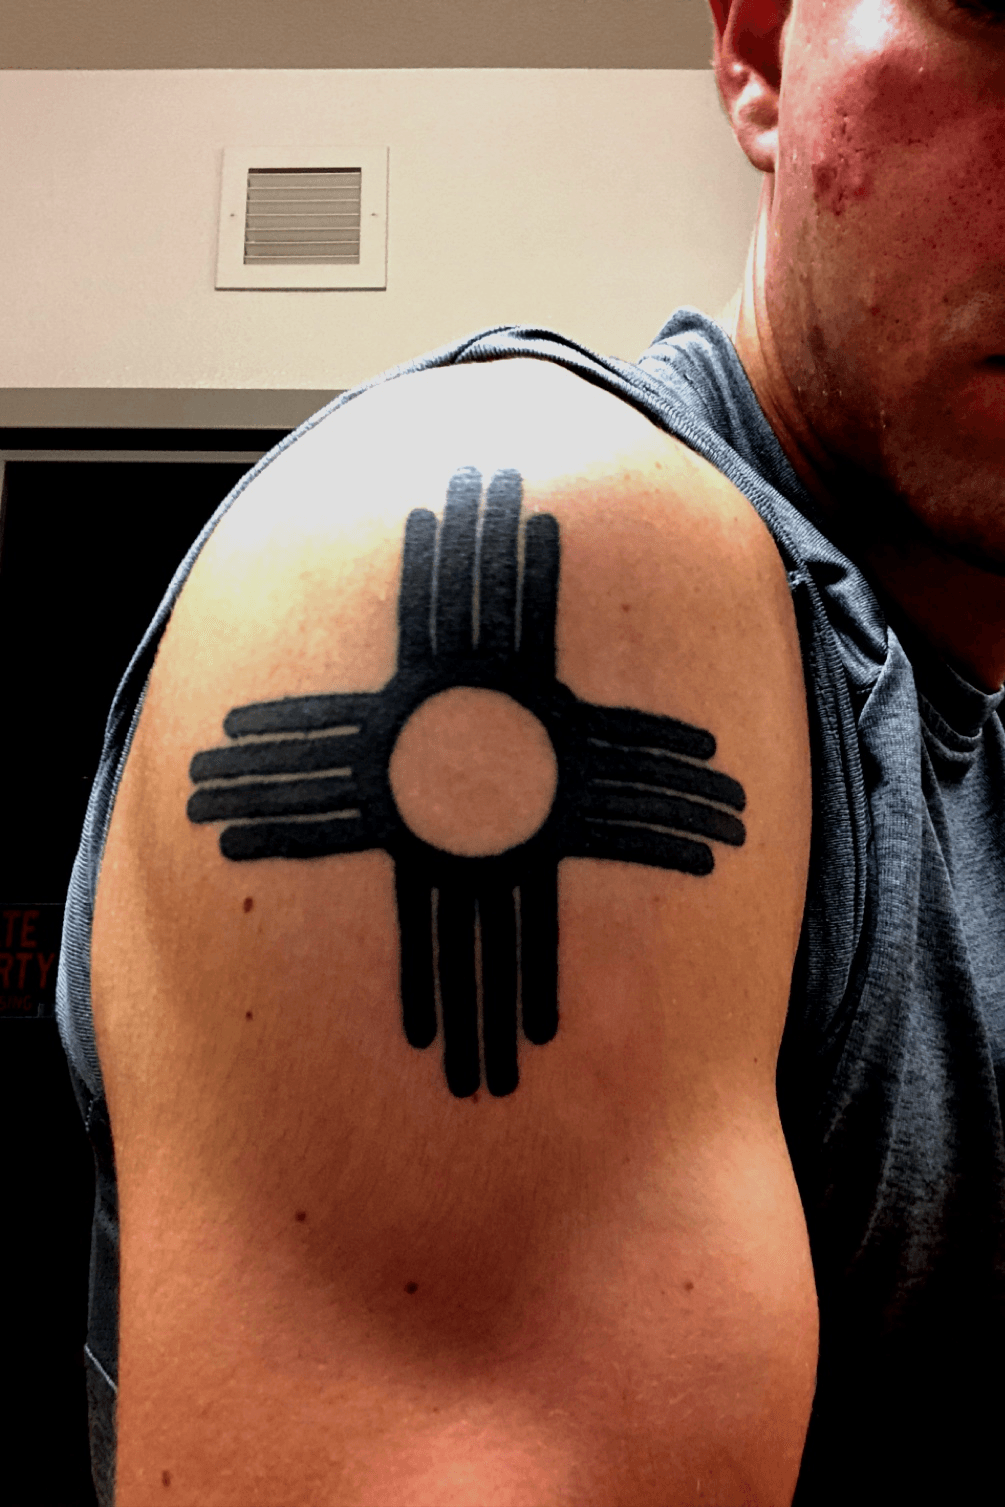 RoadrunnerZia Symbol done by Jerry Fierro from Independent Ink in Silver  City New Mexico highly requested and prestigious artist based out of the  southwest  rtattoos